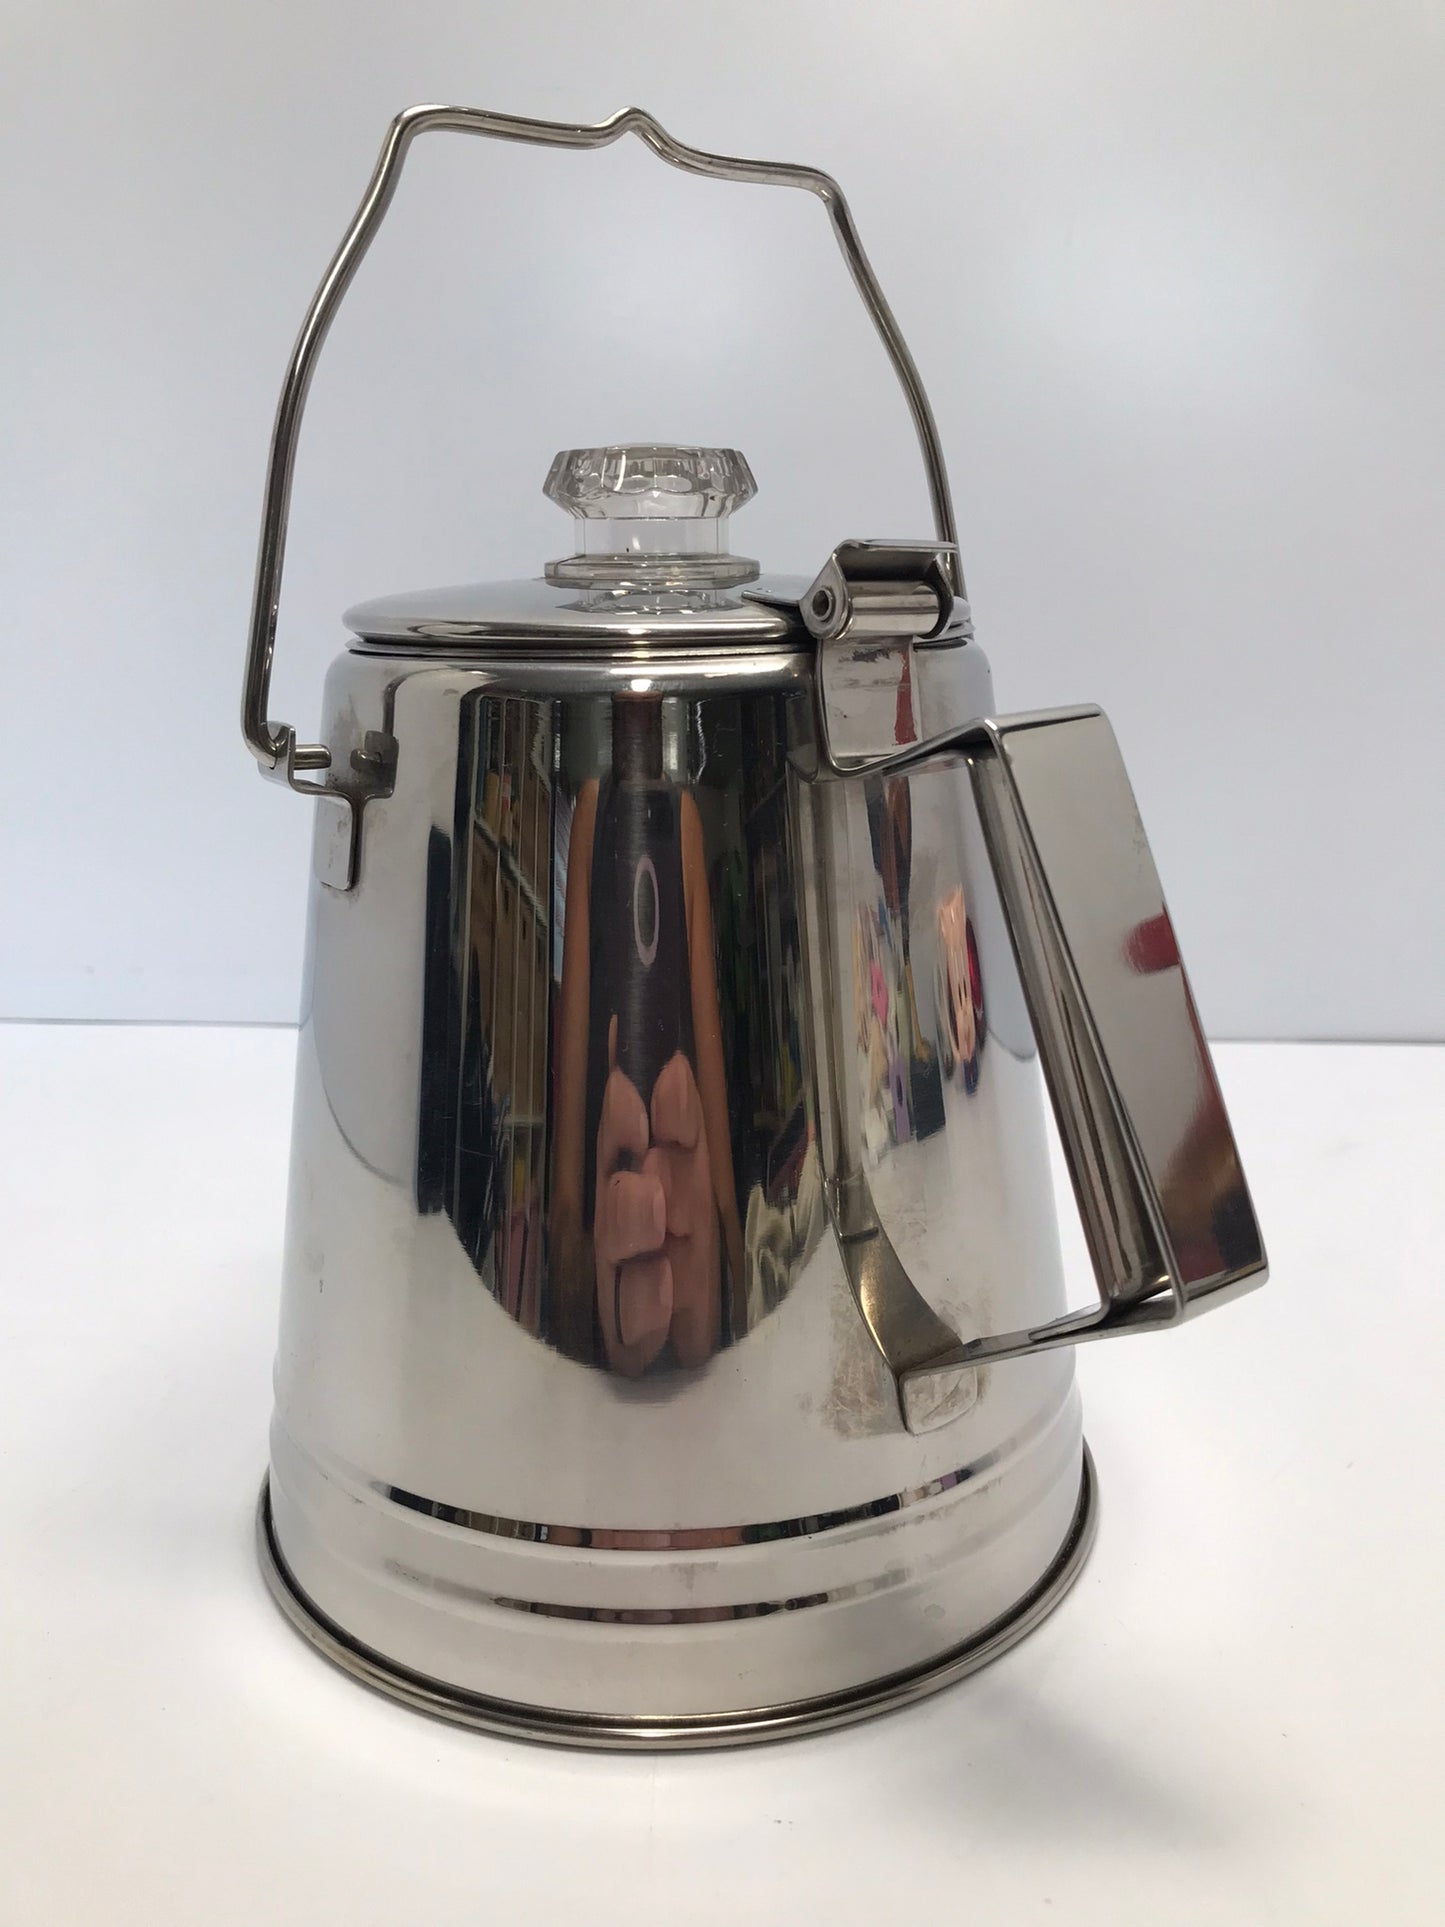 Camping Fishing Stainless 8 Cup Coffee Percolator Coffee Maker Like New Outstanding Quality